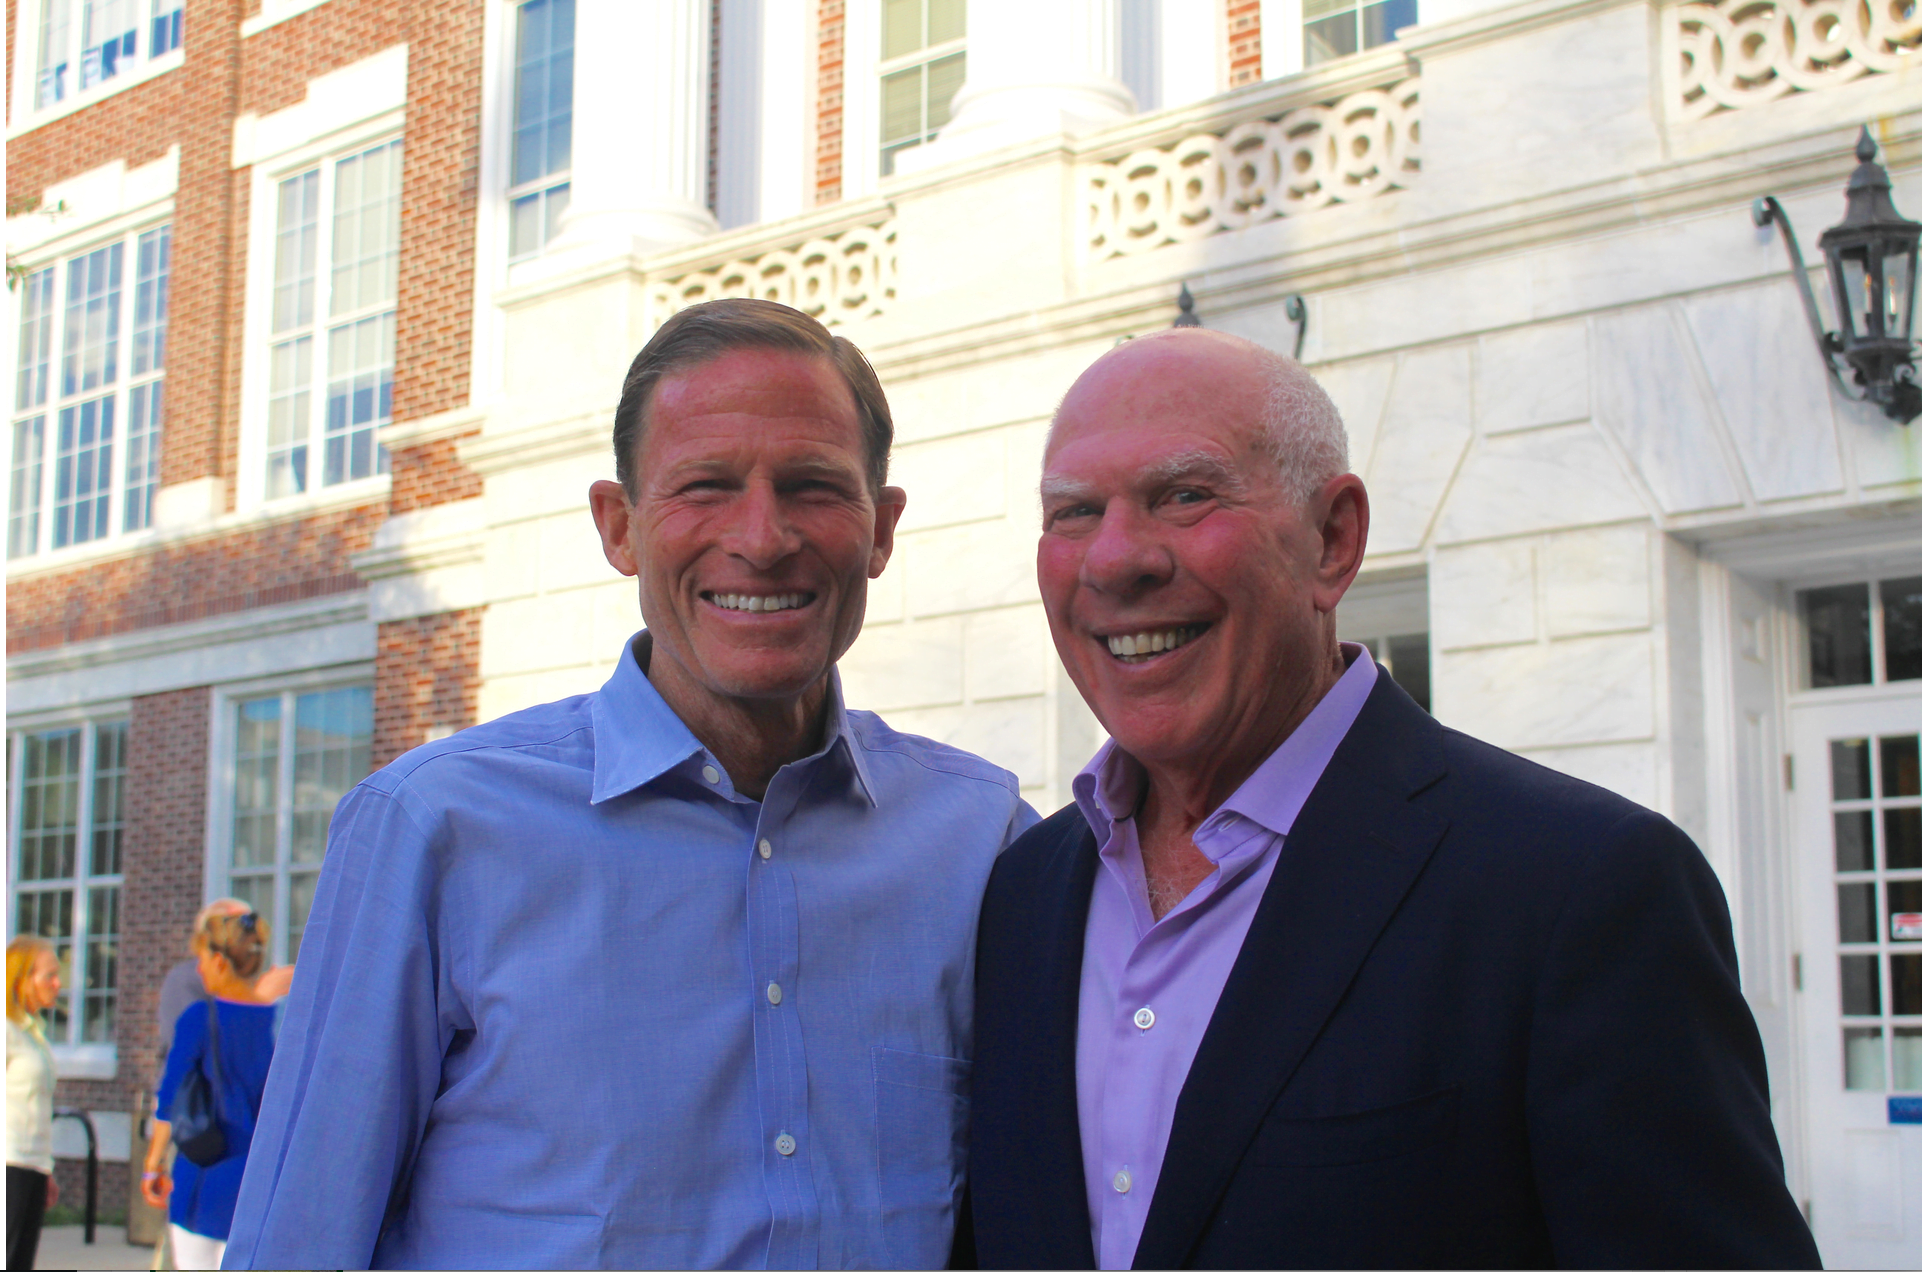 US Senator Richard Blumenthal and then candidate for First Selectman Sandy Litvack at vigil for those injured or perished in Charlottesville. Aug 13, 2017